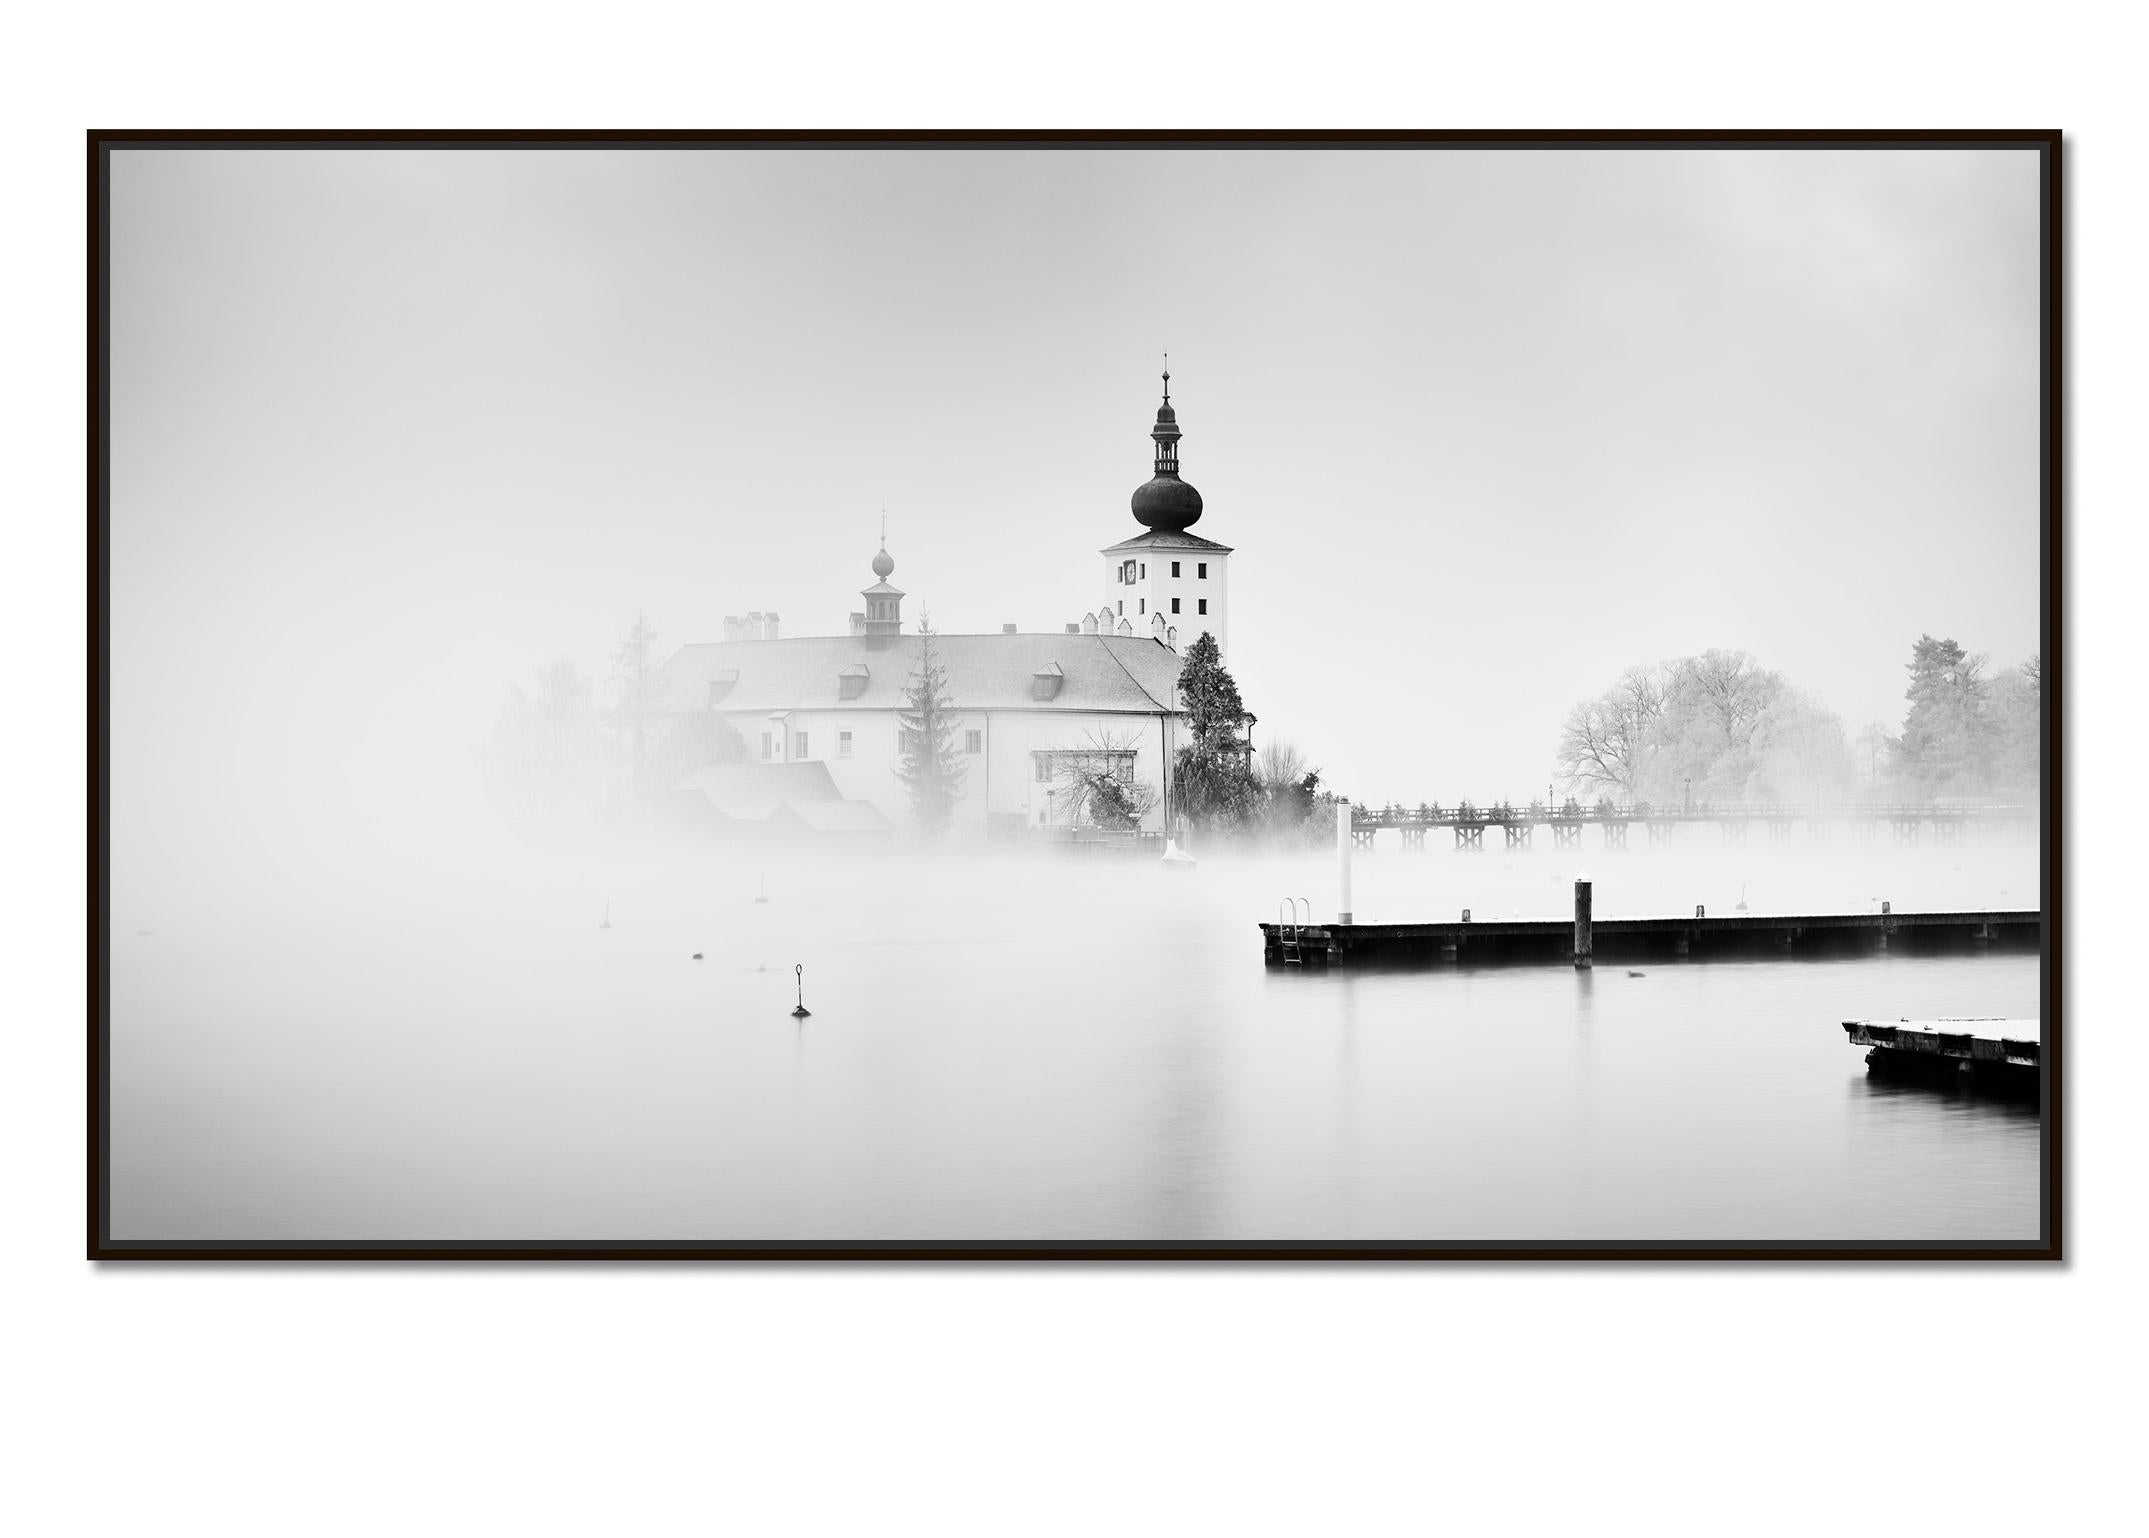 Seeschloss Ort Austria black and white long exposure waterscape art photography - Photograph by Gerald Berghammer